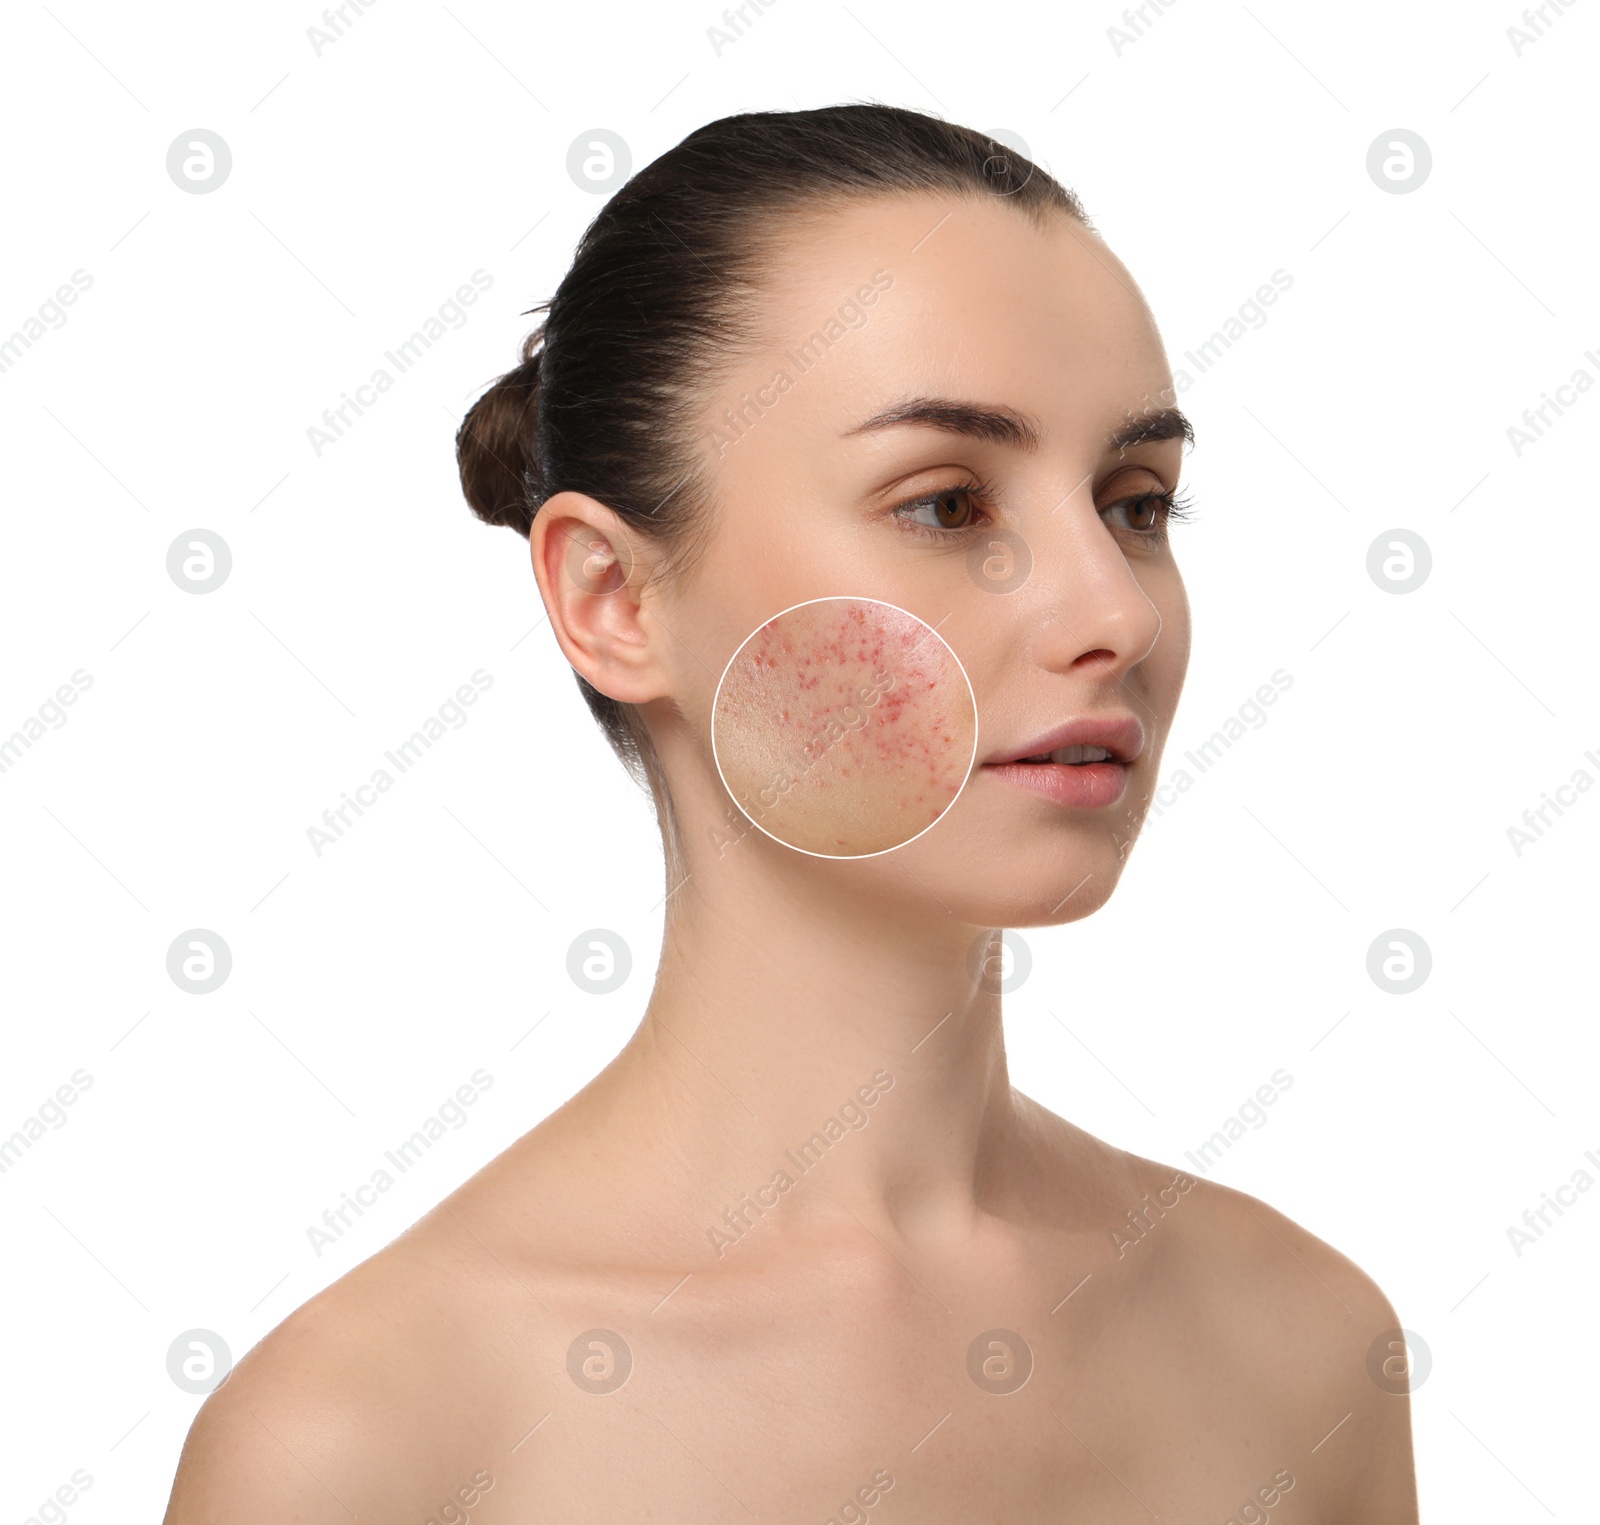 Image of Woman before and after cosmetology procedure on white background. Zoomed area showing problem skin